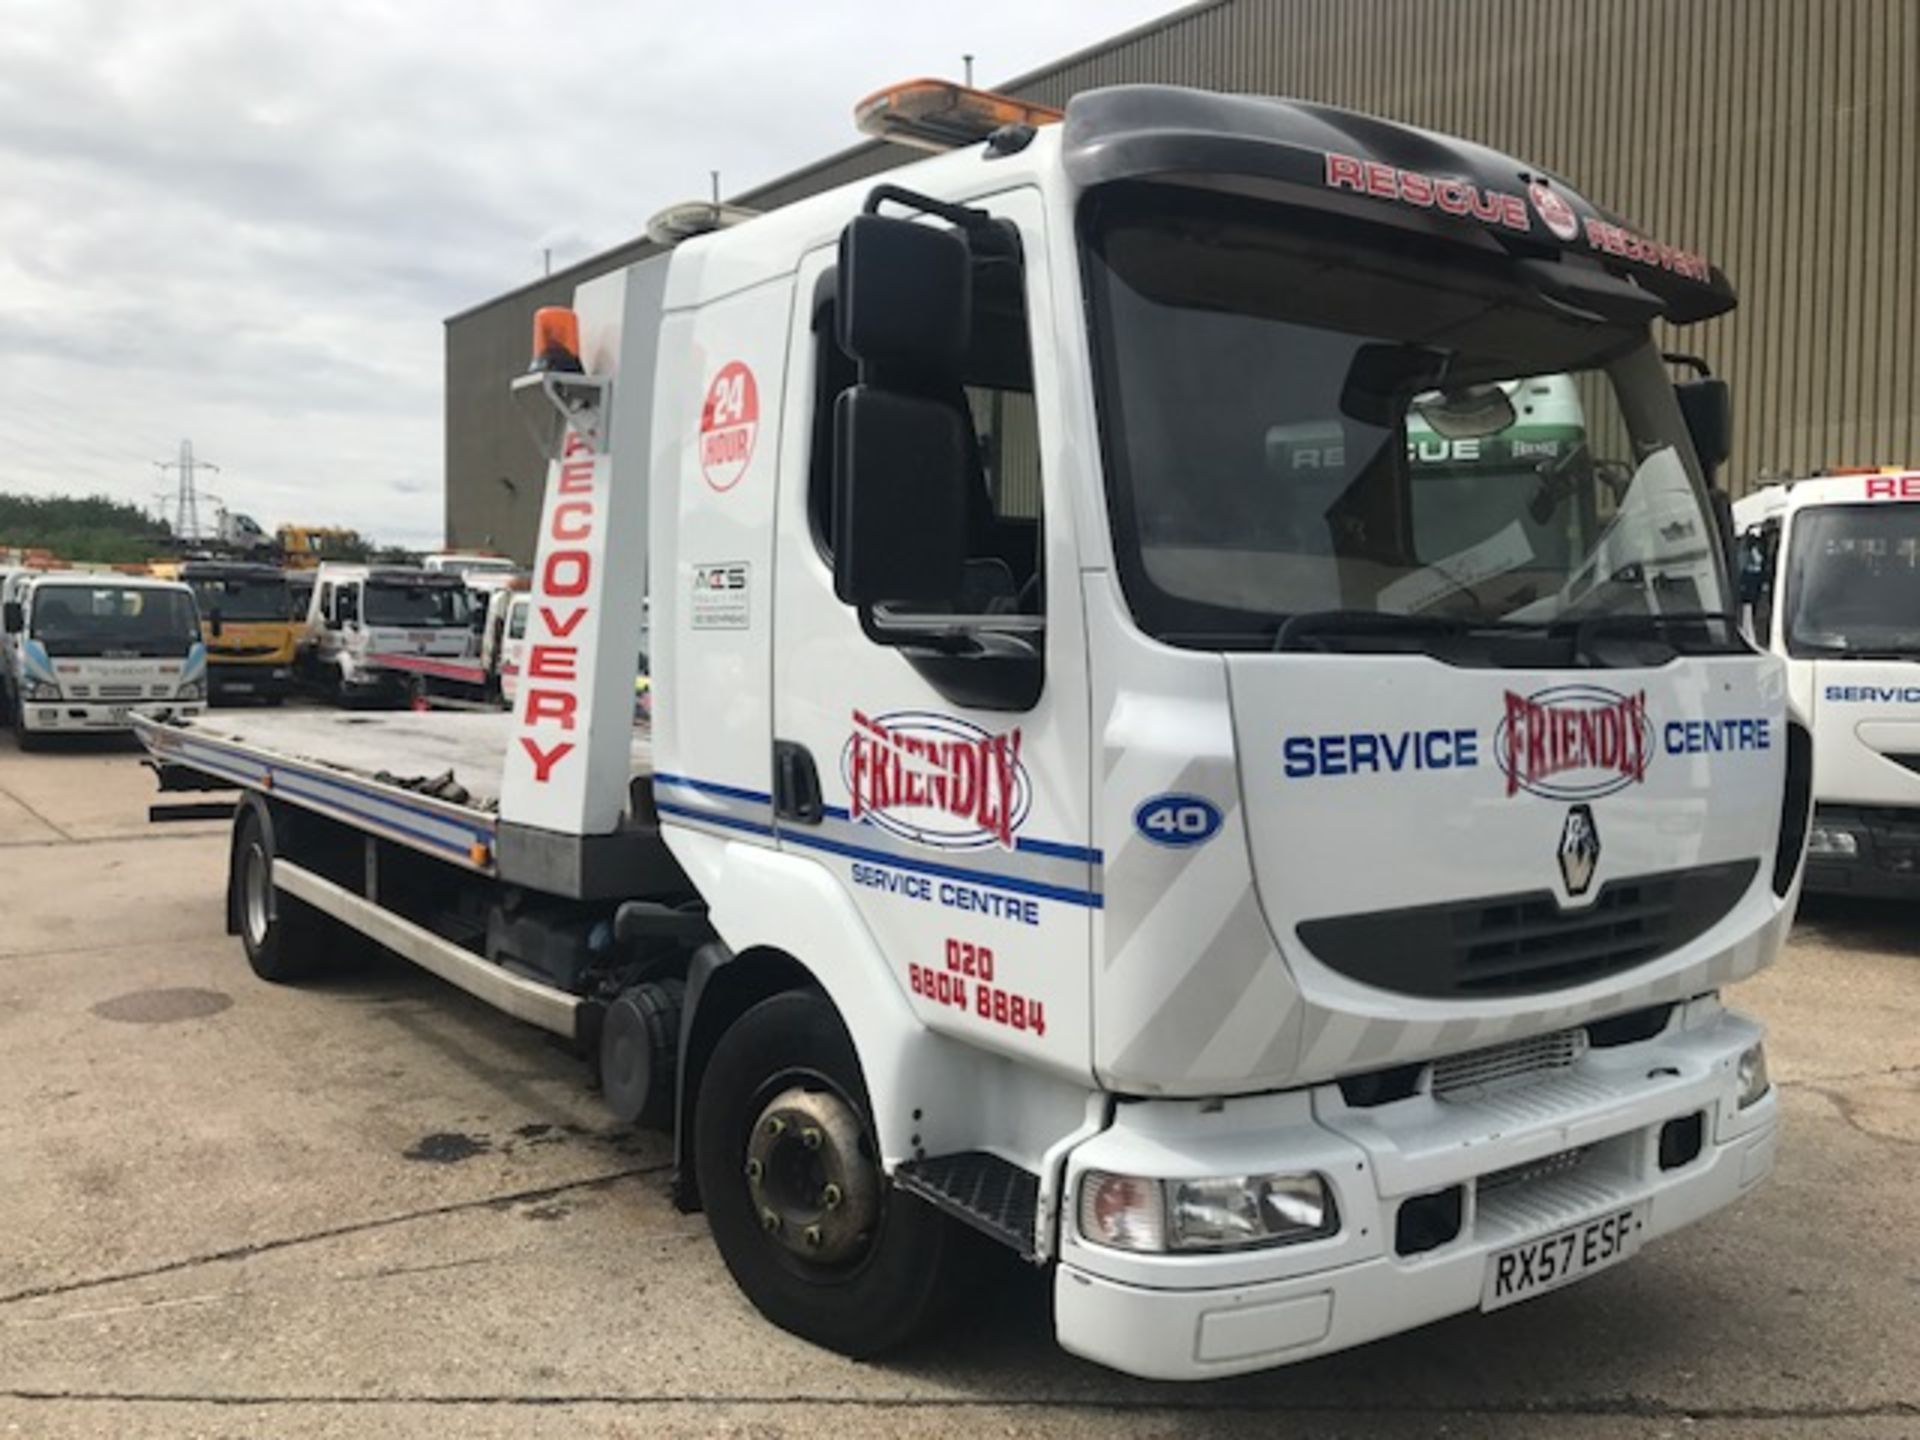 2007 Renault Midlum 10T day cab breakdown recovery vehicle complete with built in Garmin satnav with